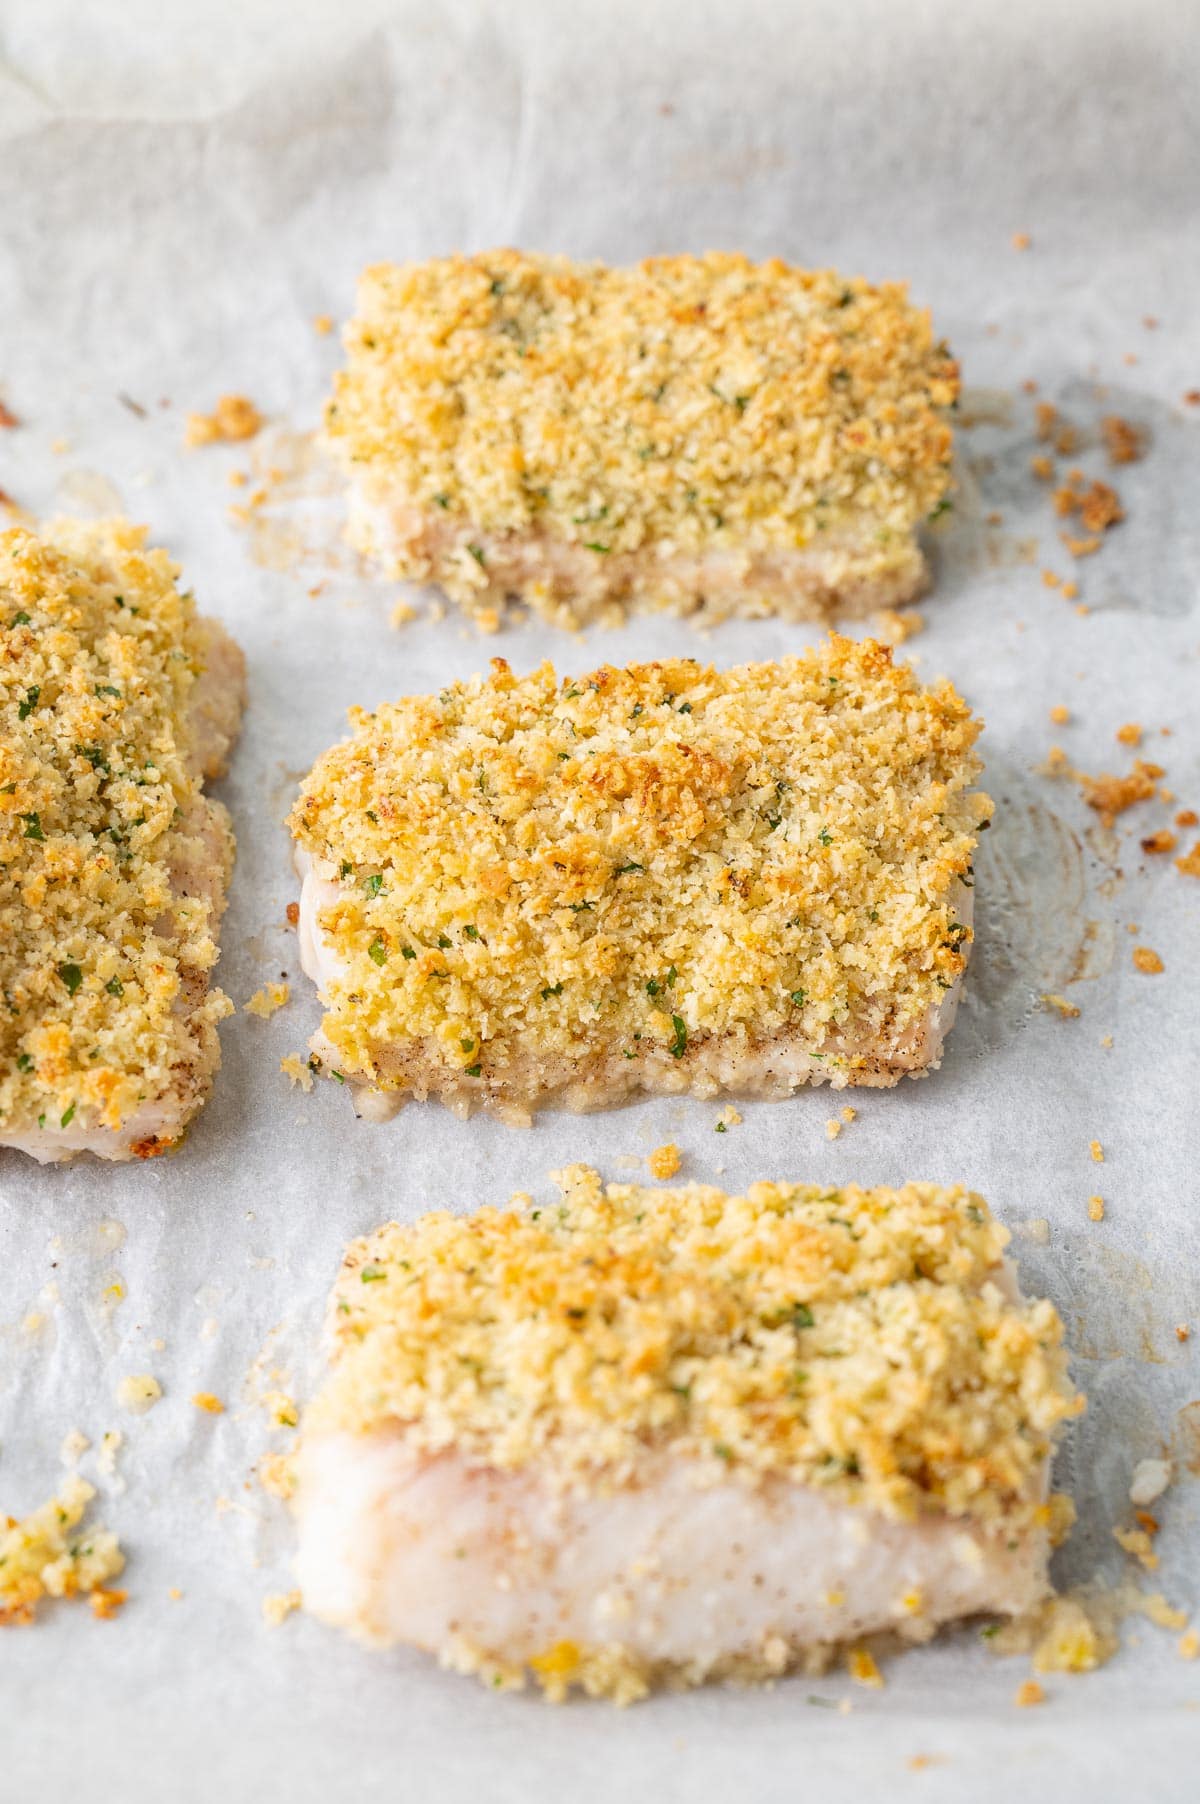 Parmesan crusted cod on a baking sheet lined with parchment paper.